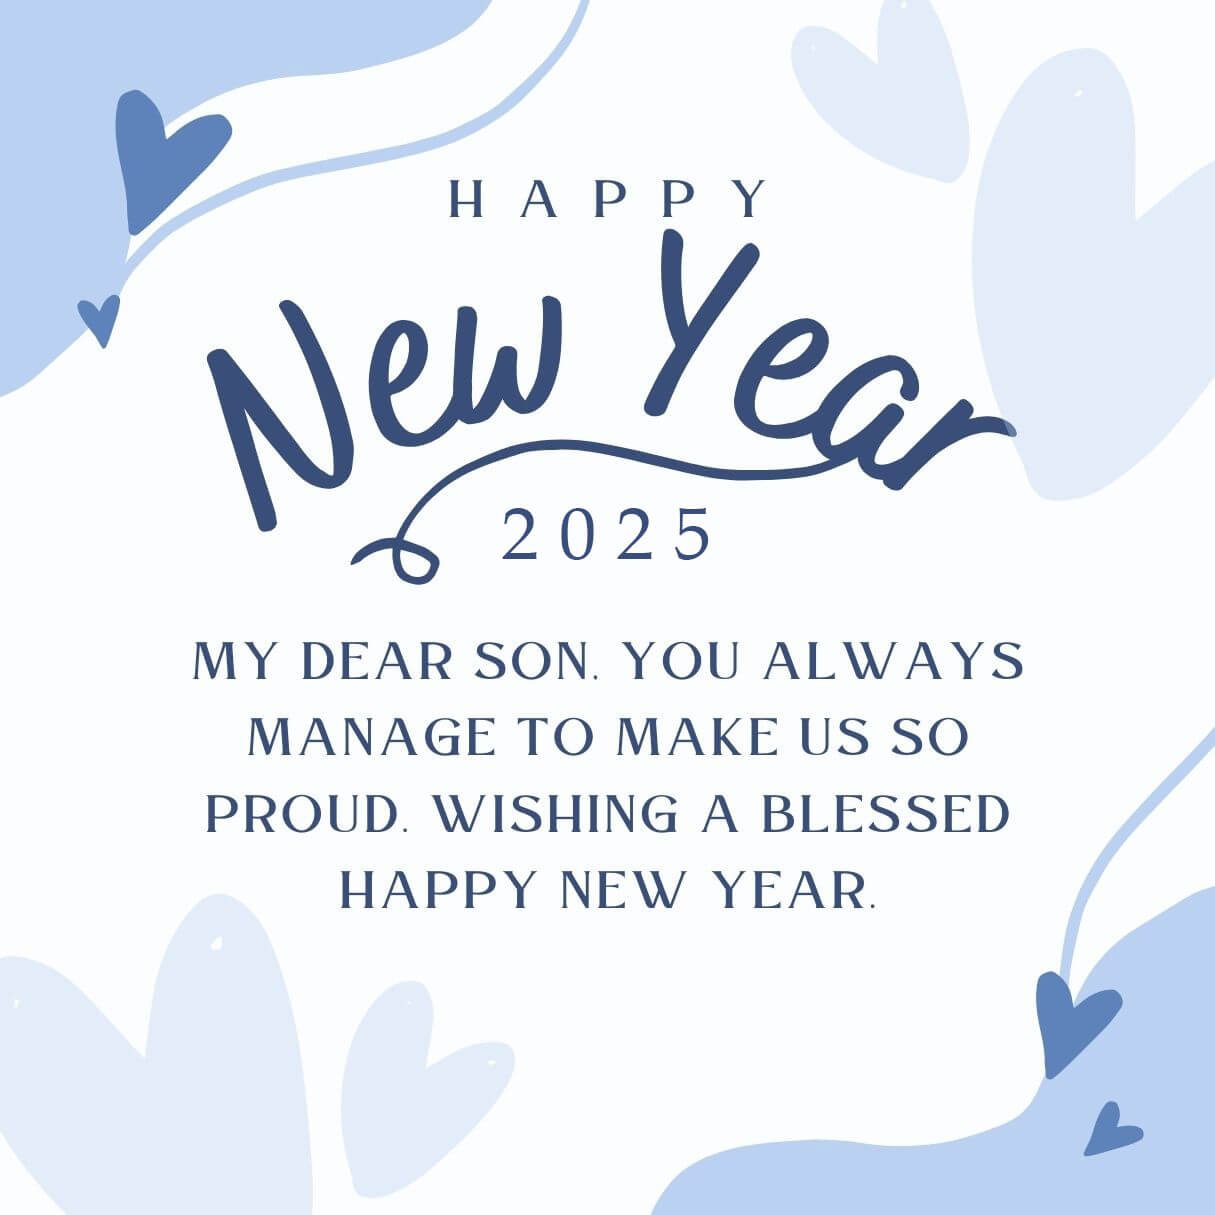 2025 Happy New Year Wishes For Son.tif